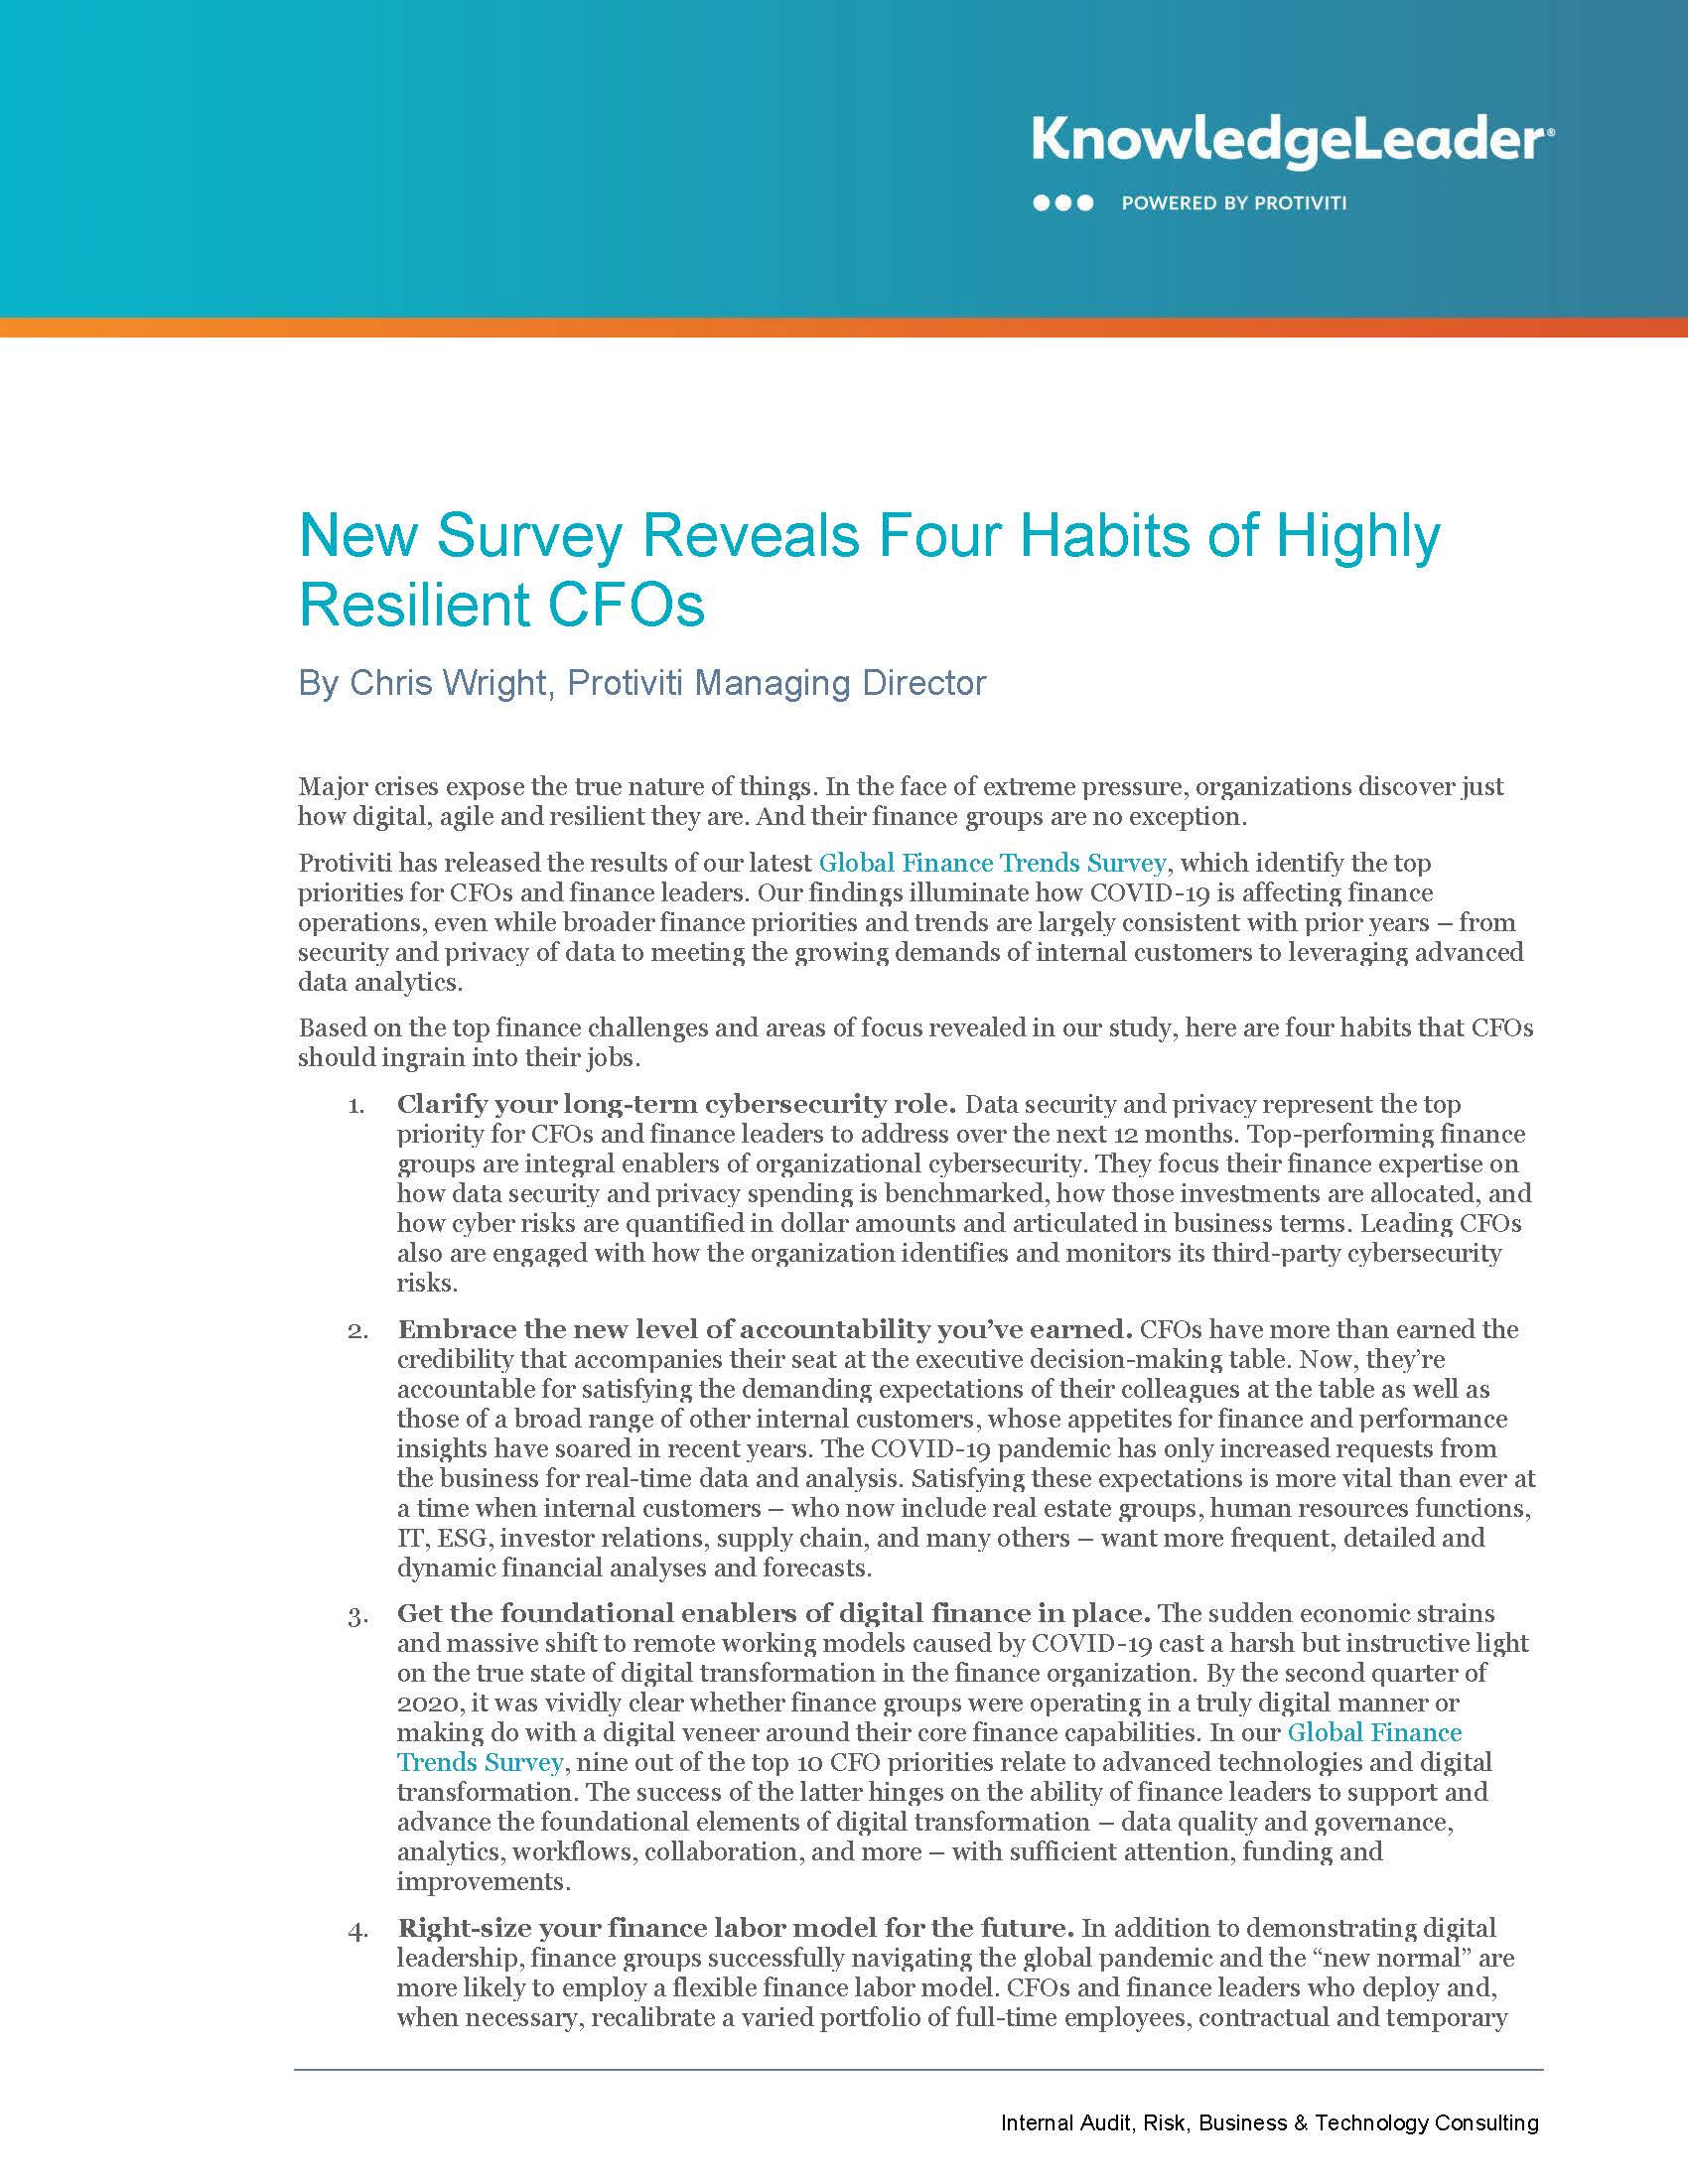 Screenshot of the first page of New Survey Reveals Four Habits of Highly Resilient CFOs